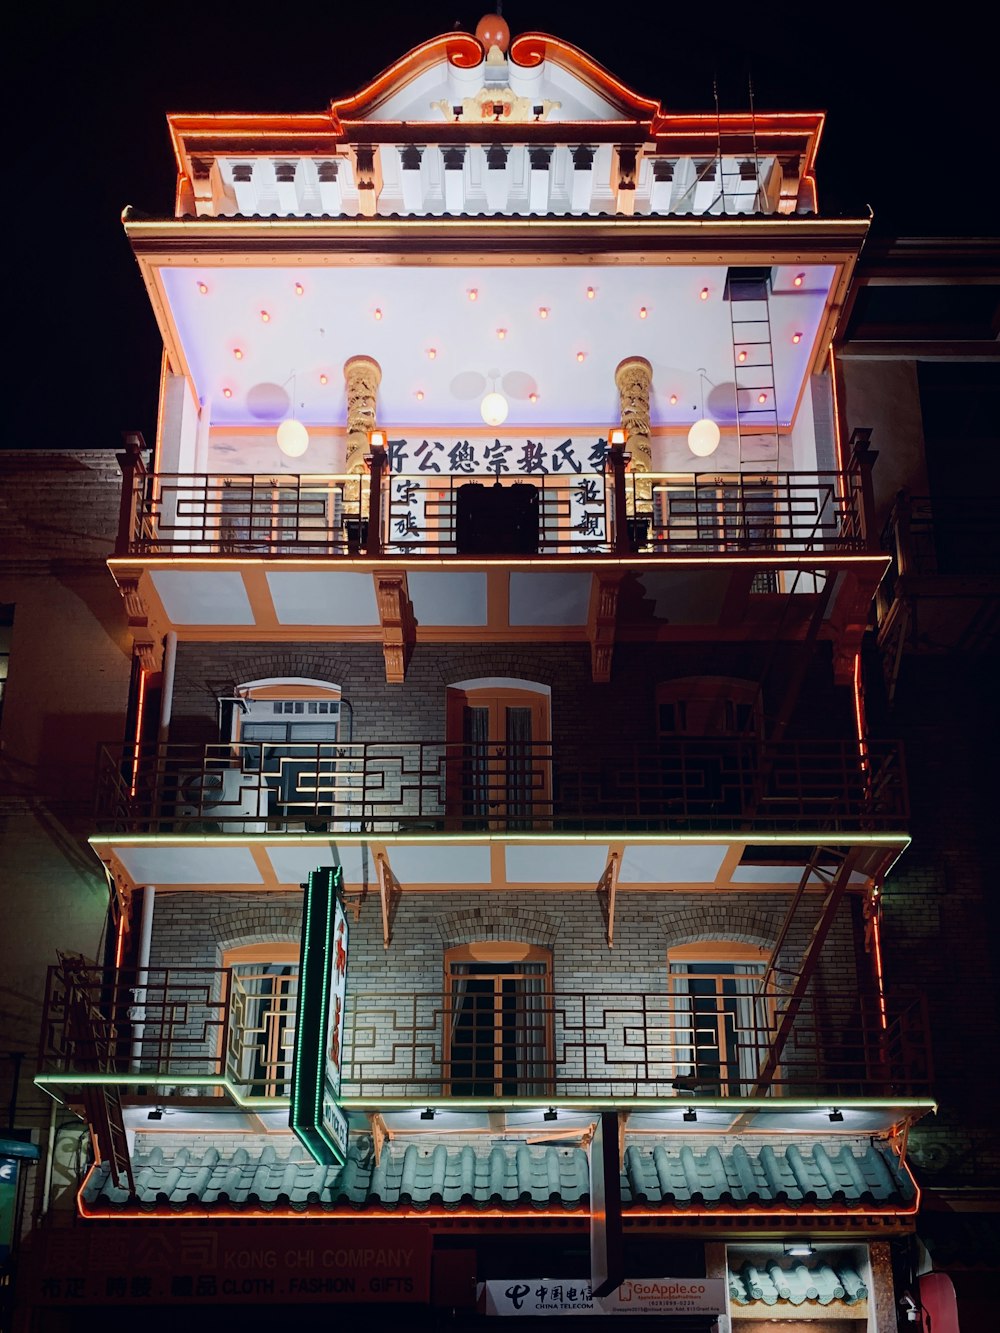 building with balconies during night